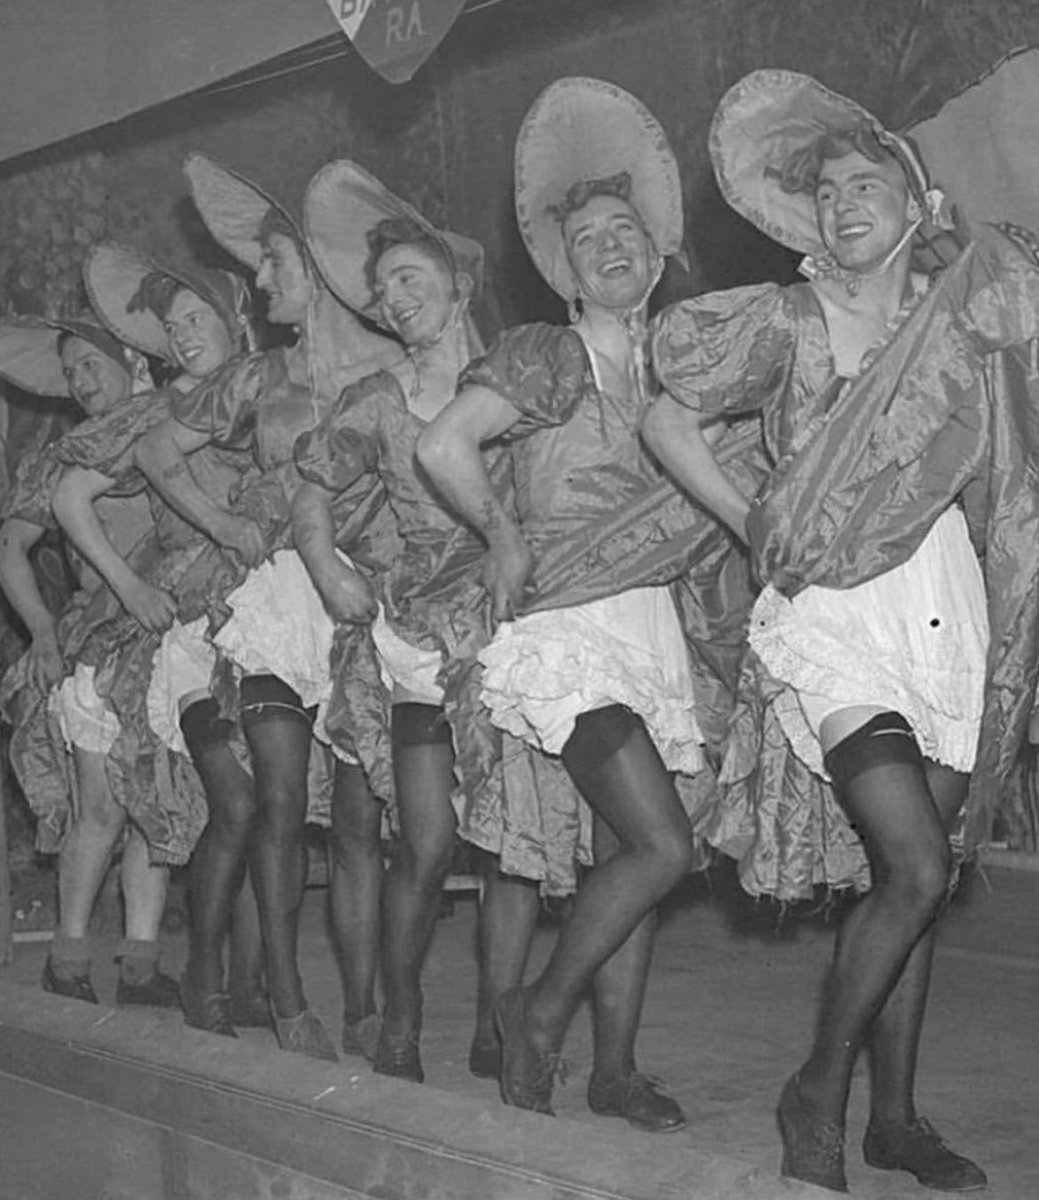 During World War II, drag shows gained popularity among troops from the United States and Britain as a means of stress relief. It provided them with a way to temporarily escape the hardships of war. However, a unique incident occurred when a British unit hosting a drag show came